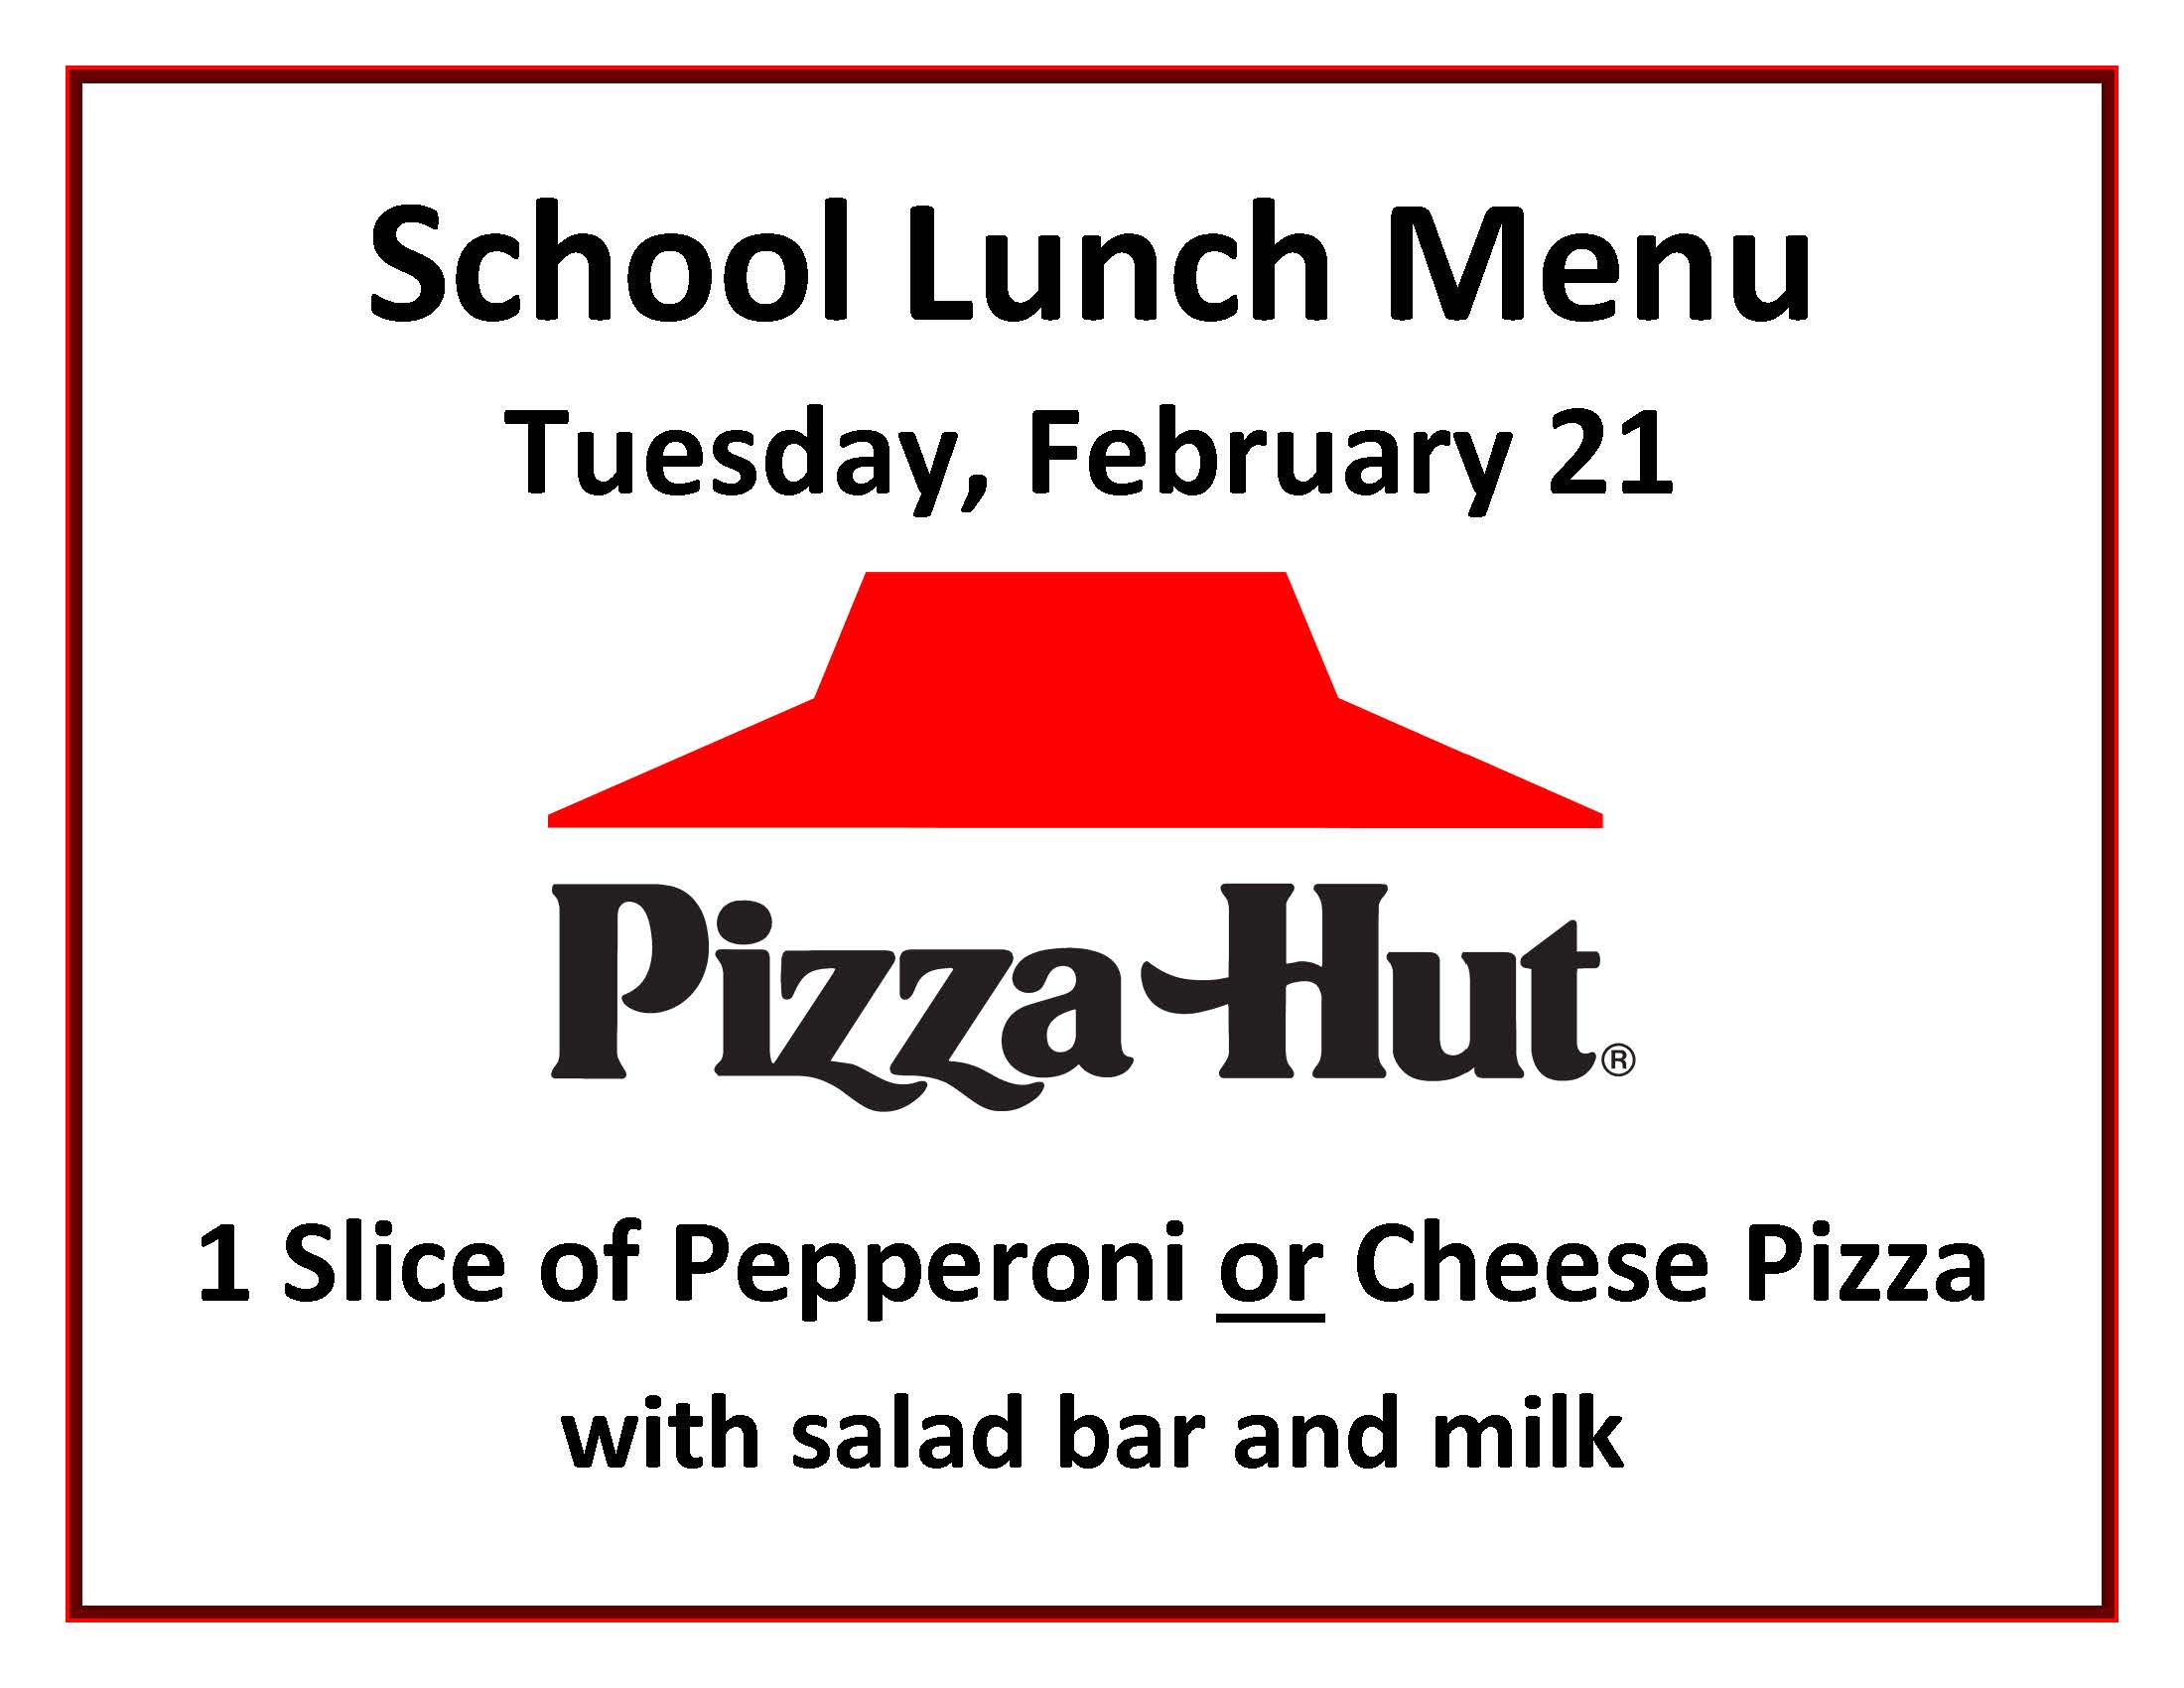 Pizza Hut Day in the school cafeteria-February 21